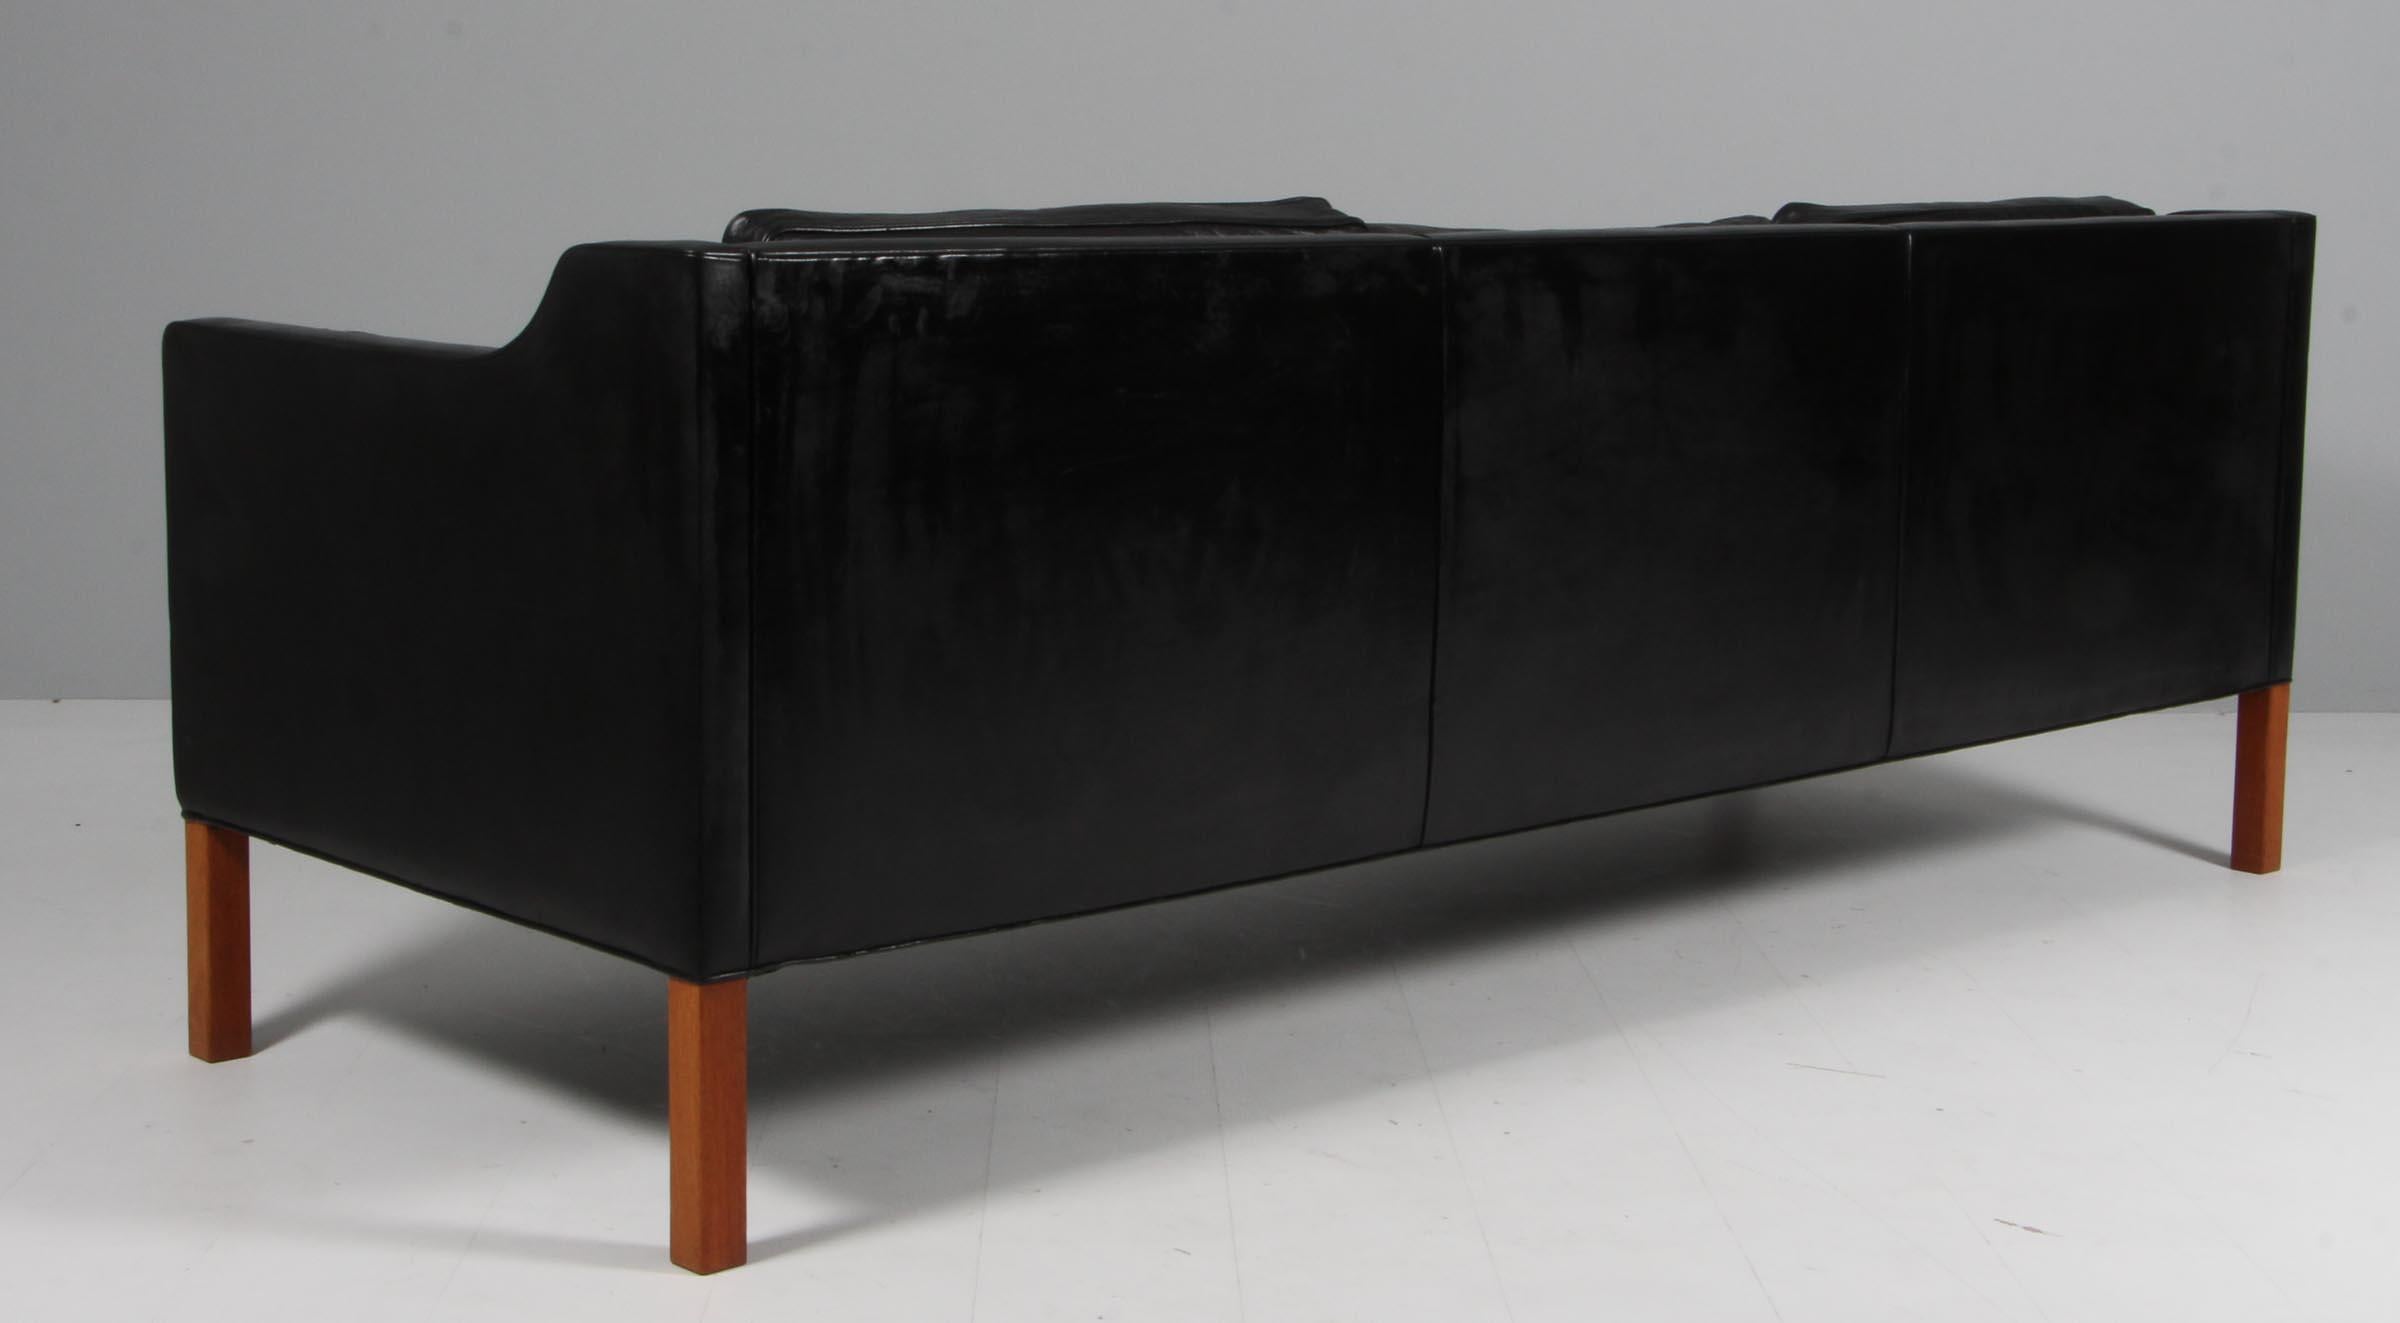 Børge Mogensen three-seat sofa with original patinated black leather upholstery.

Legs of teak.

Model 2213, made by Fredericia Furniture.